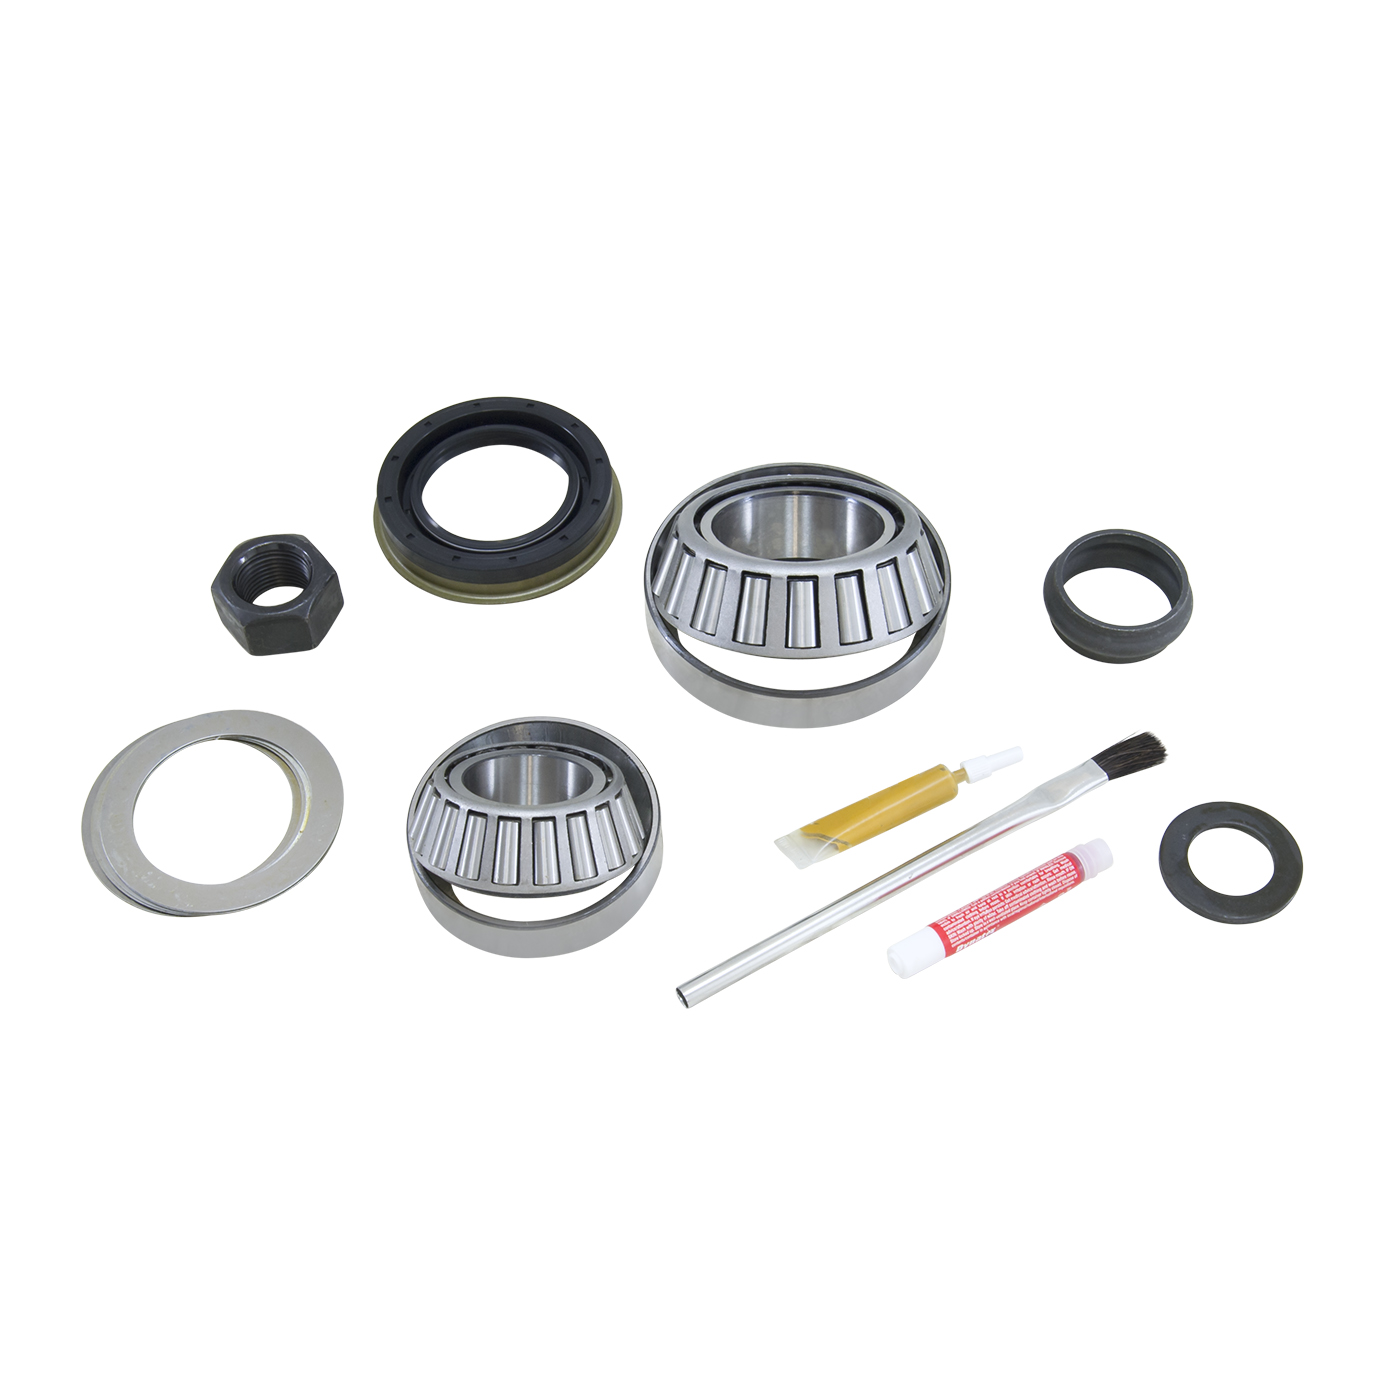 Yukon Pinion Install Kit for Dodge Dana 44 front differential w/ disconnect 